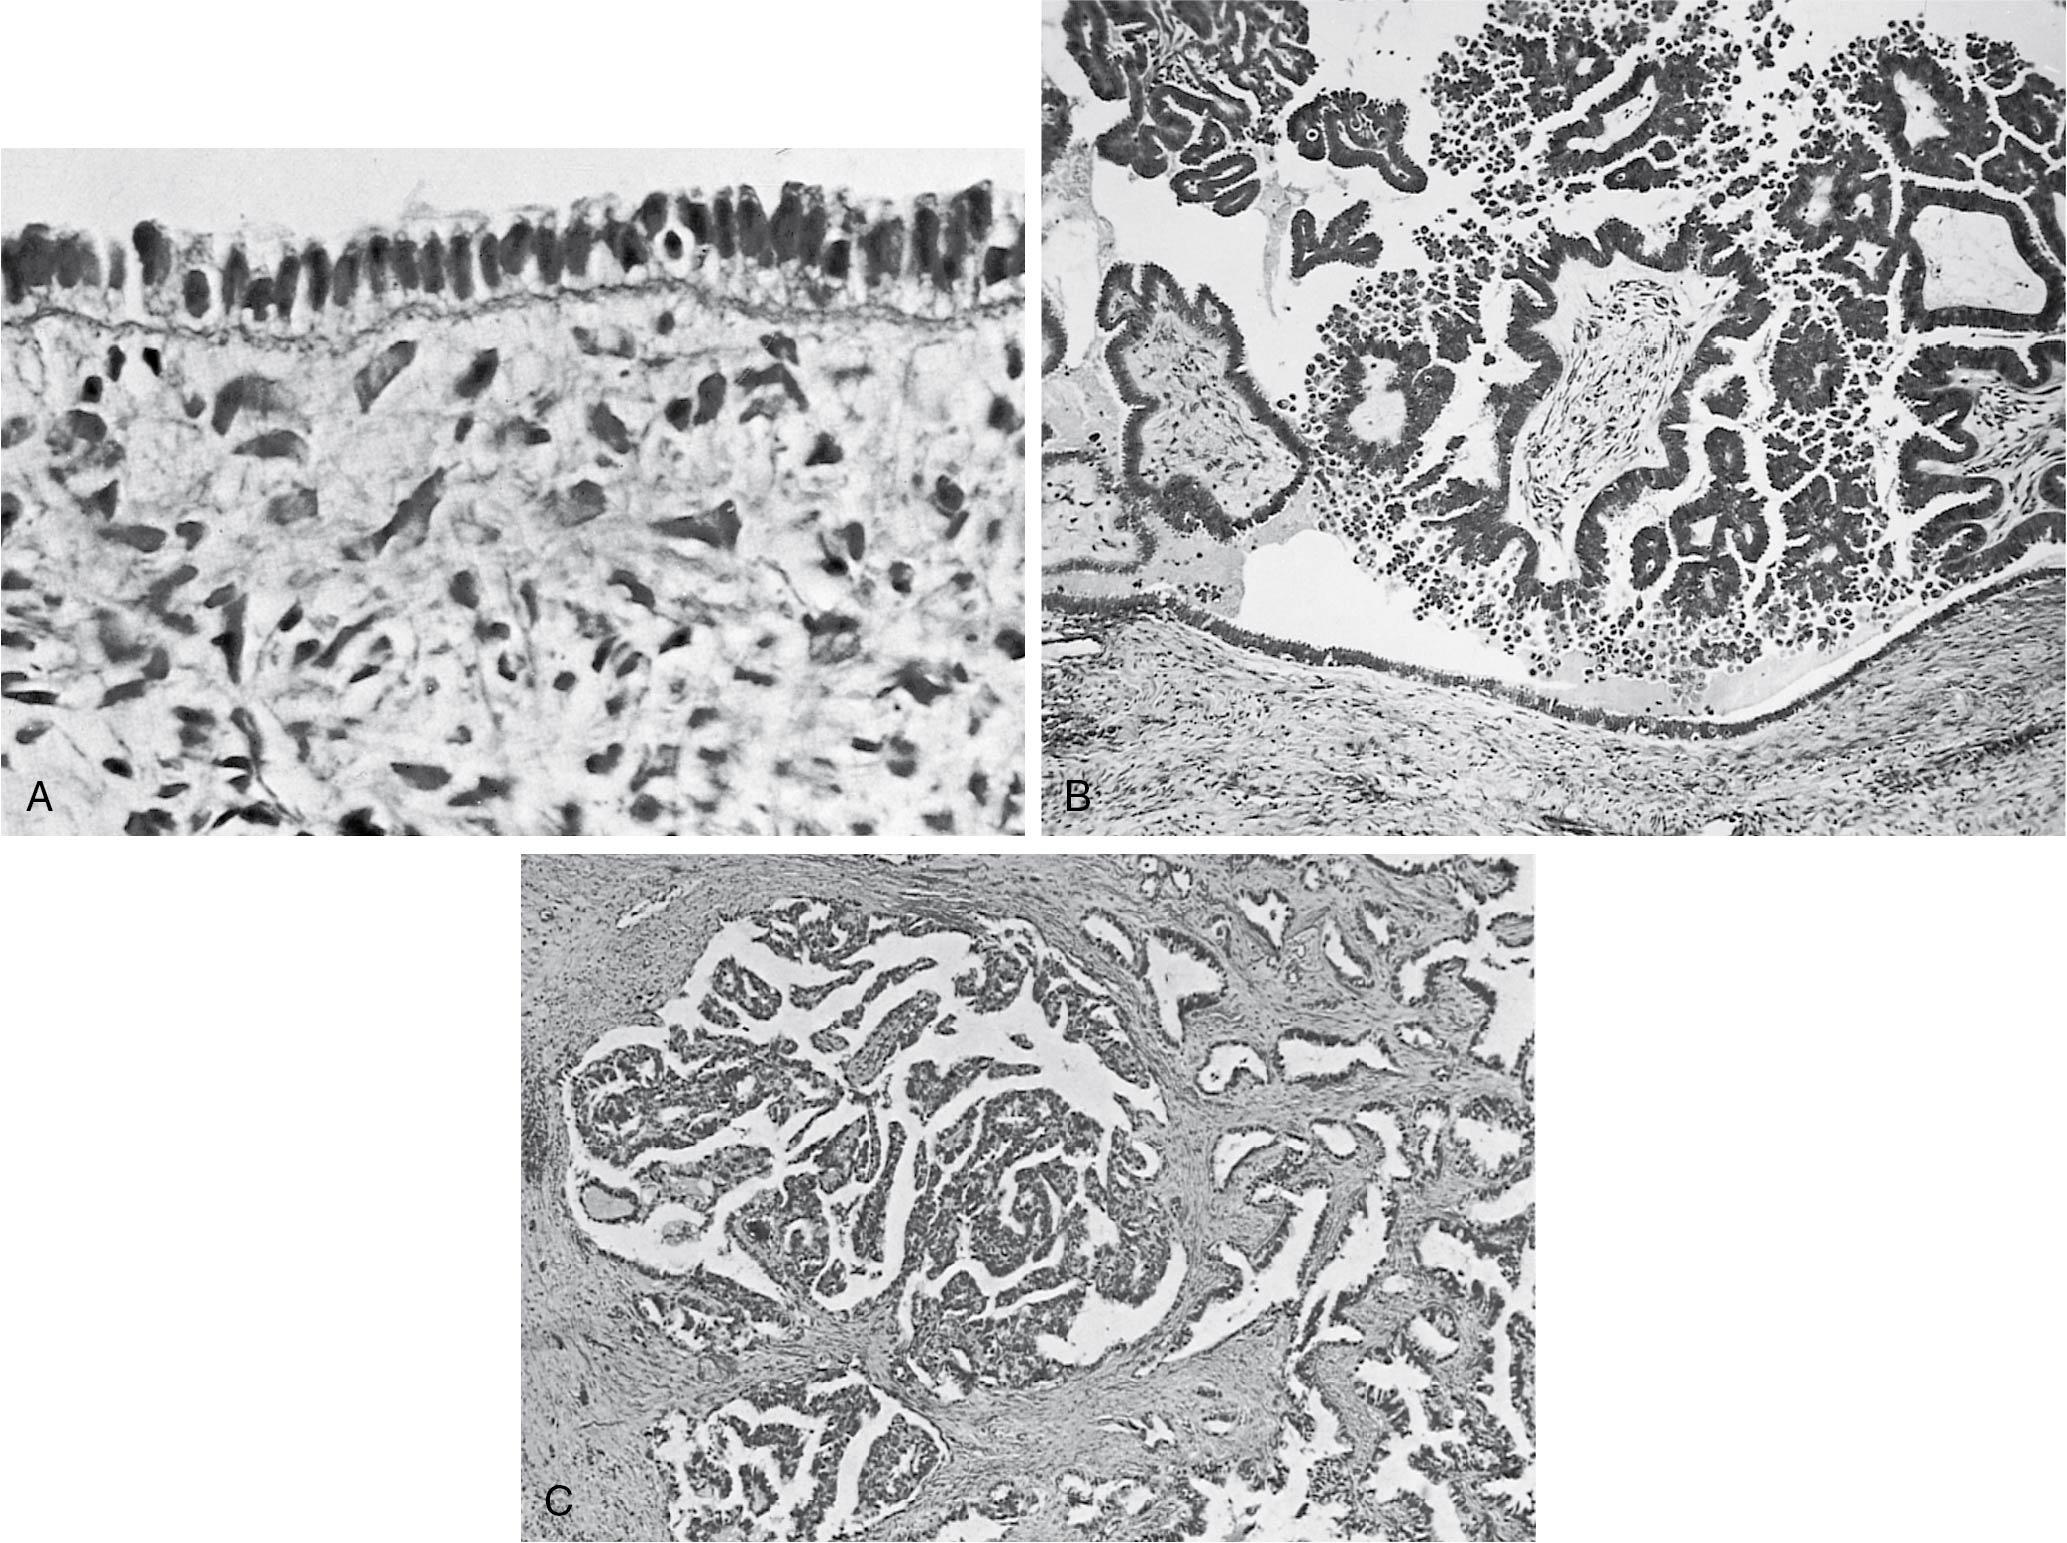 Fig. 33.2, A, Ciliated epithelium of a well-differentiated serous tumor (original magnification ×800). B, Serous papillary cystadenoma of borderline malignancy. The epithelium resembles that of the fallopian tube, and a well-developed papillary pattern is present (original magnification ×80). C, Serous papillary adenocarcinoma (original magnification ×50). The neoplastic epithelium invades the stroma.